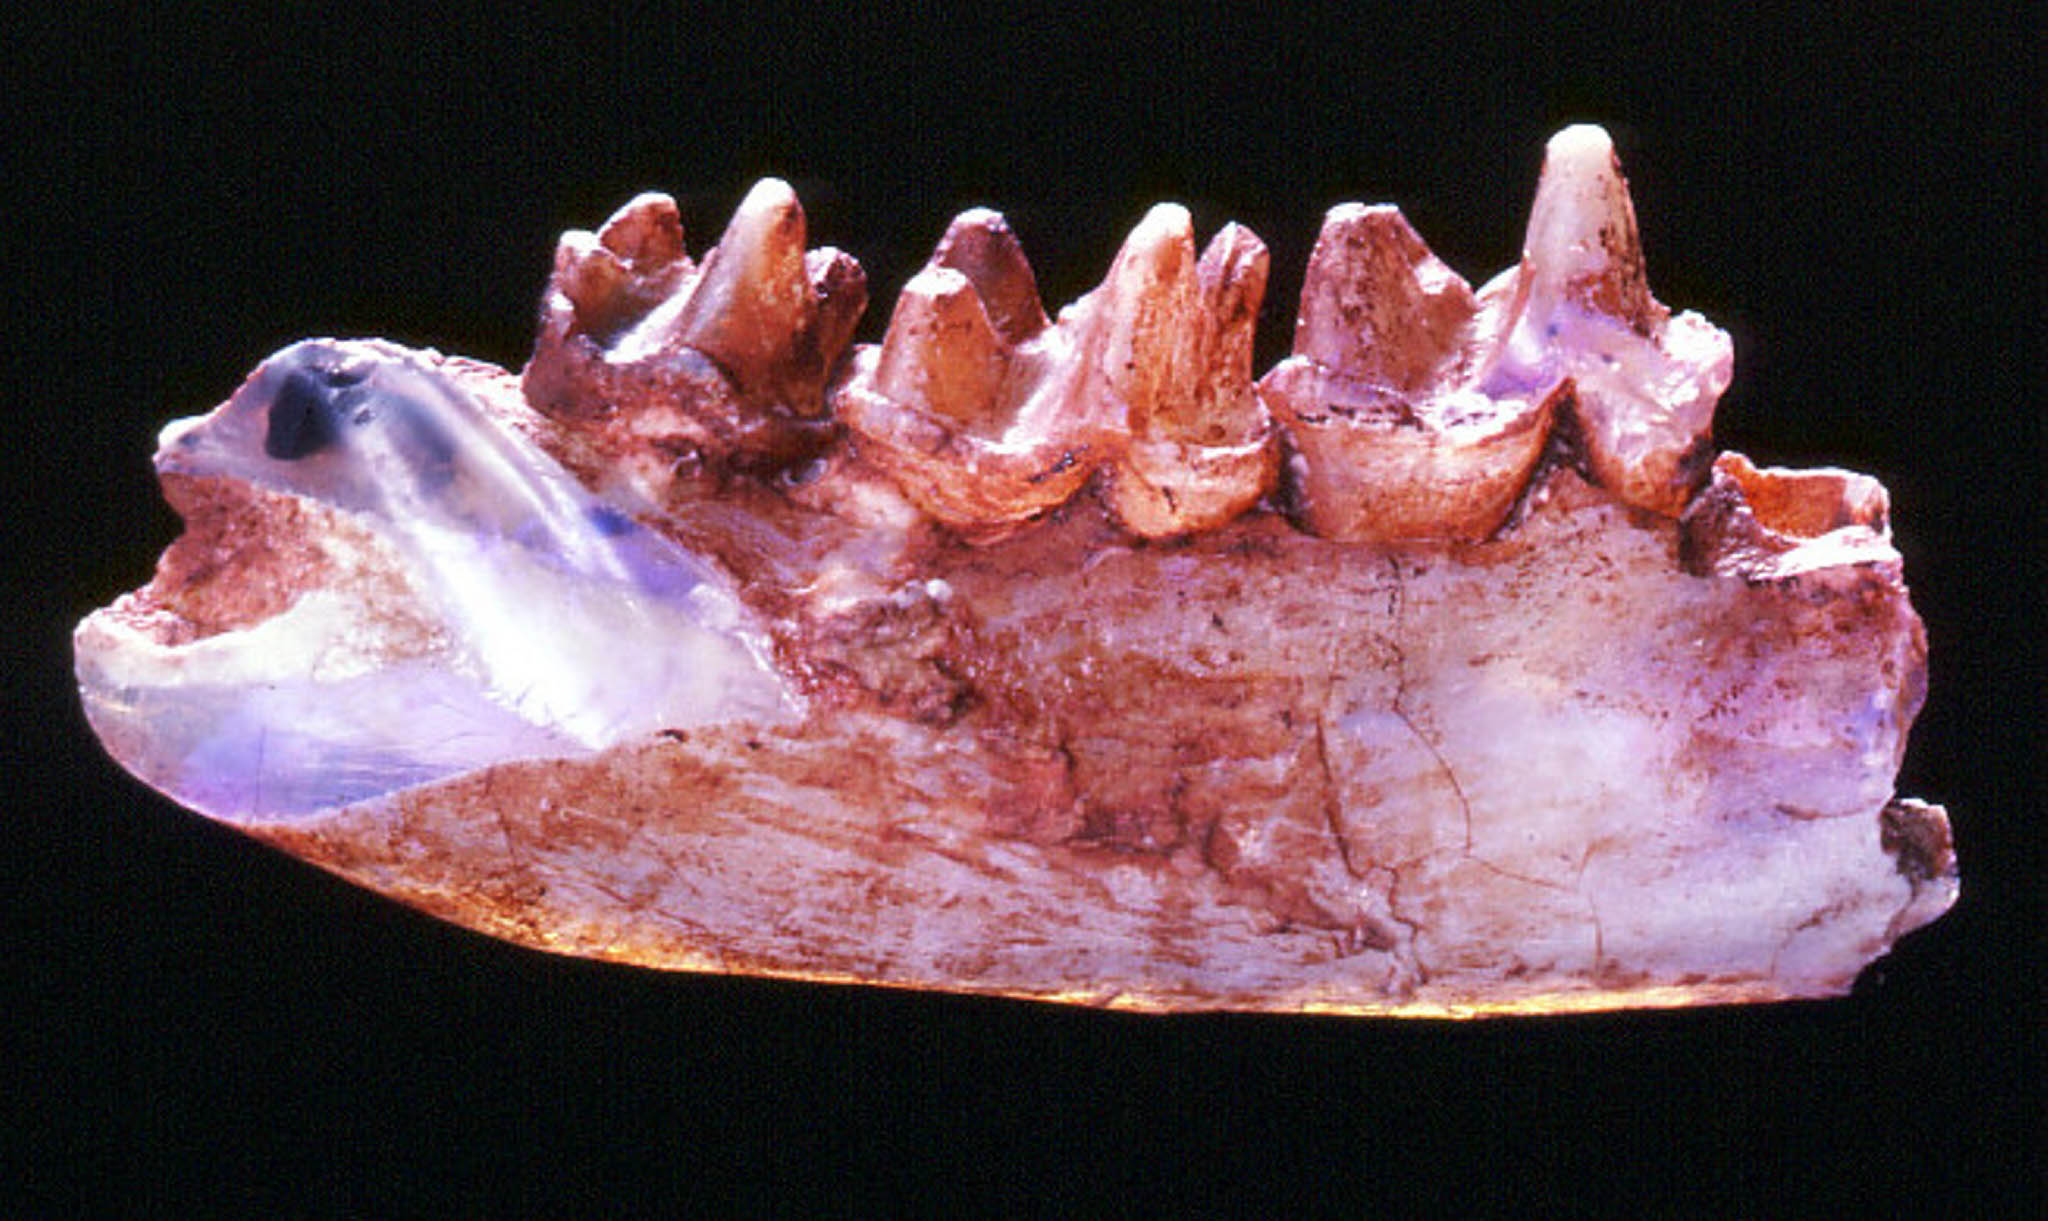 This opalized jawbone from Steropodon galmani, the first mammal from the Mesozoic Era found in Australia, hints at the spectacular diversity of early mammals on the continent. (Australian Museum)